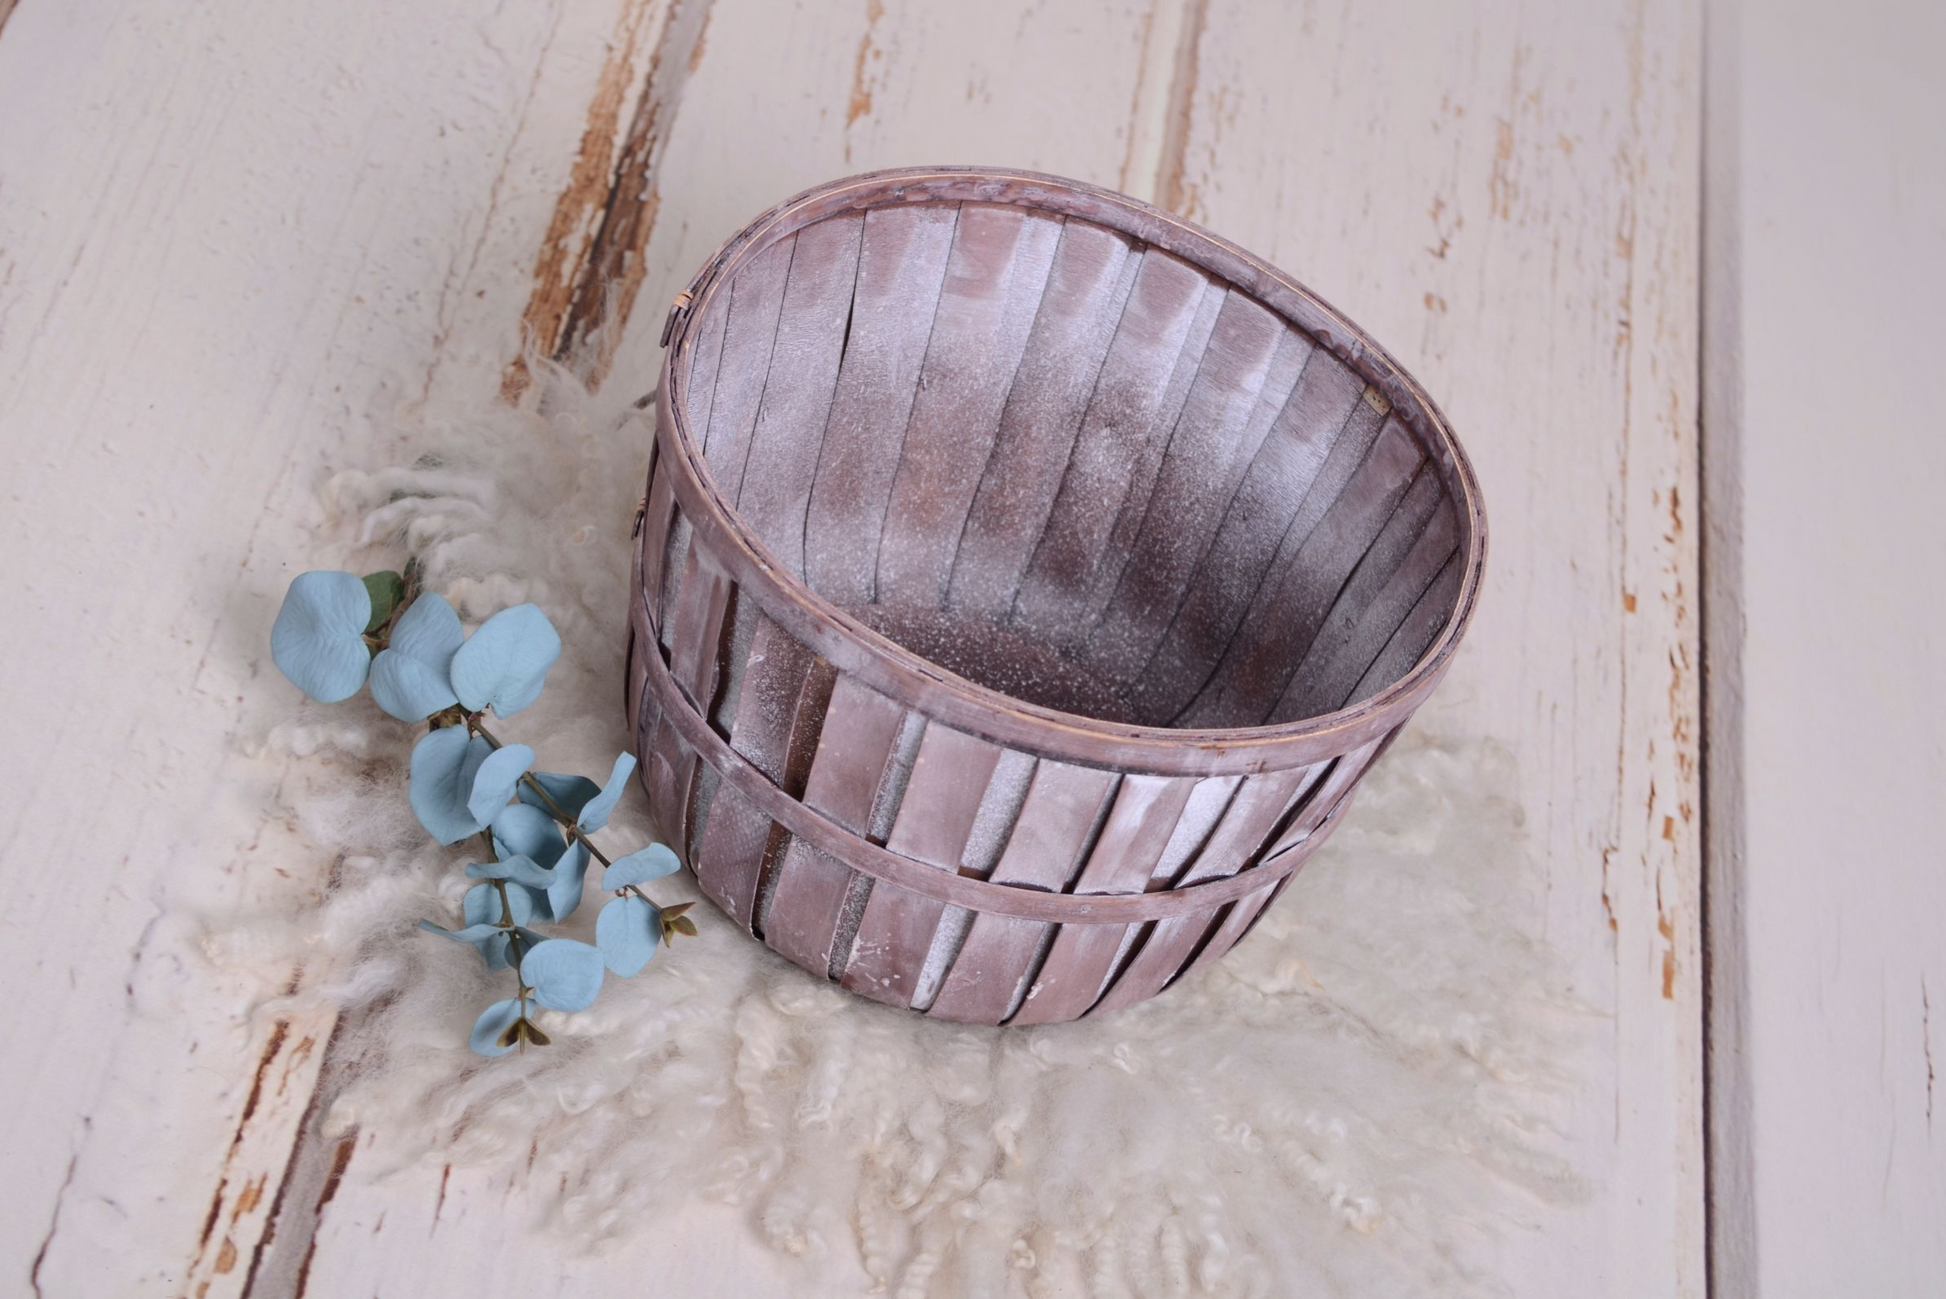 Vintage wooden bucket prop with rustic finish. Perfect for newborn photography sessions. Available for purchase at Newborn Studio Props.